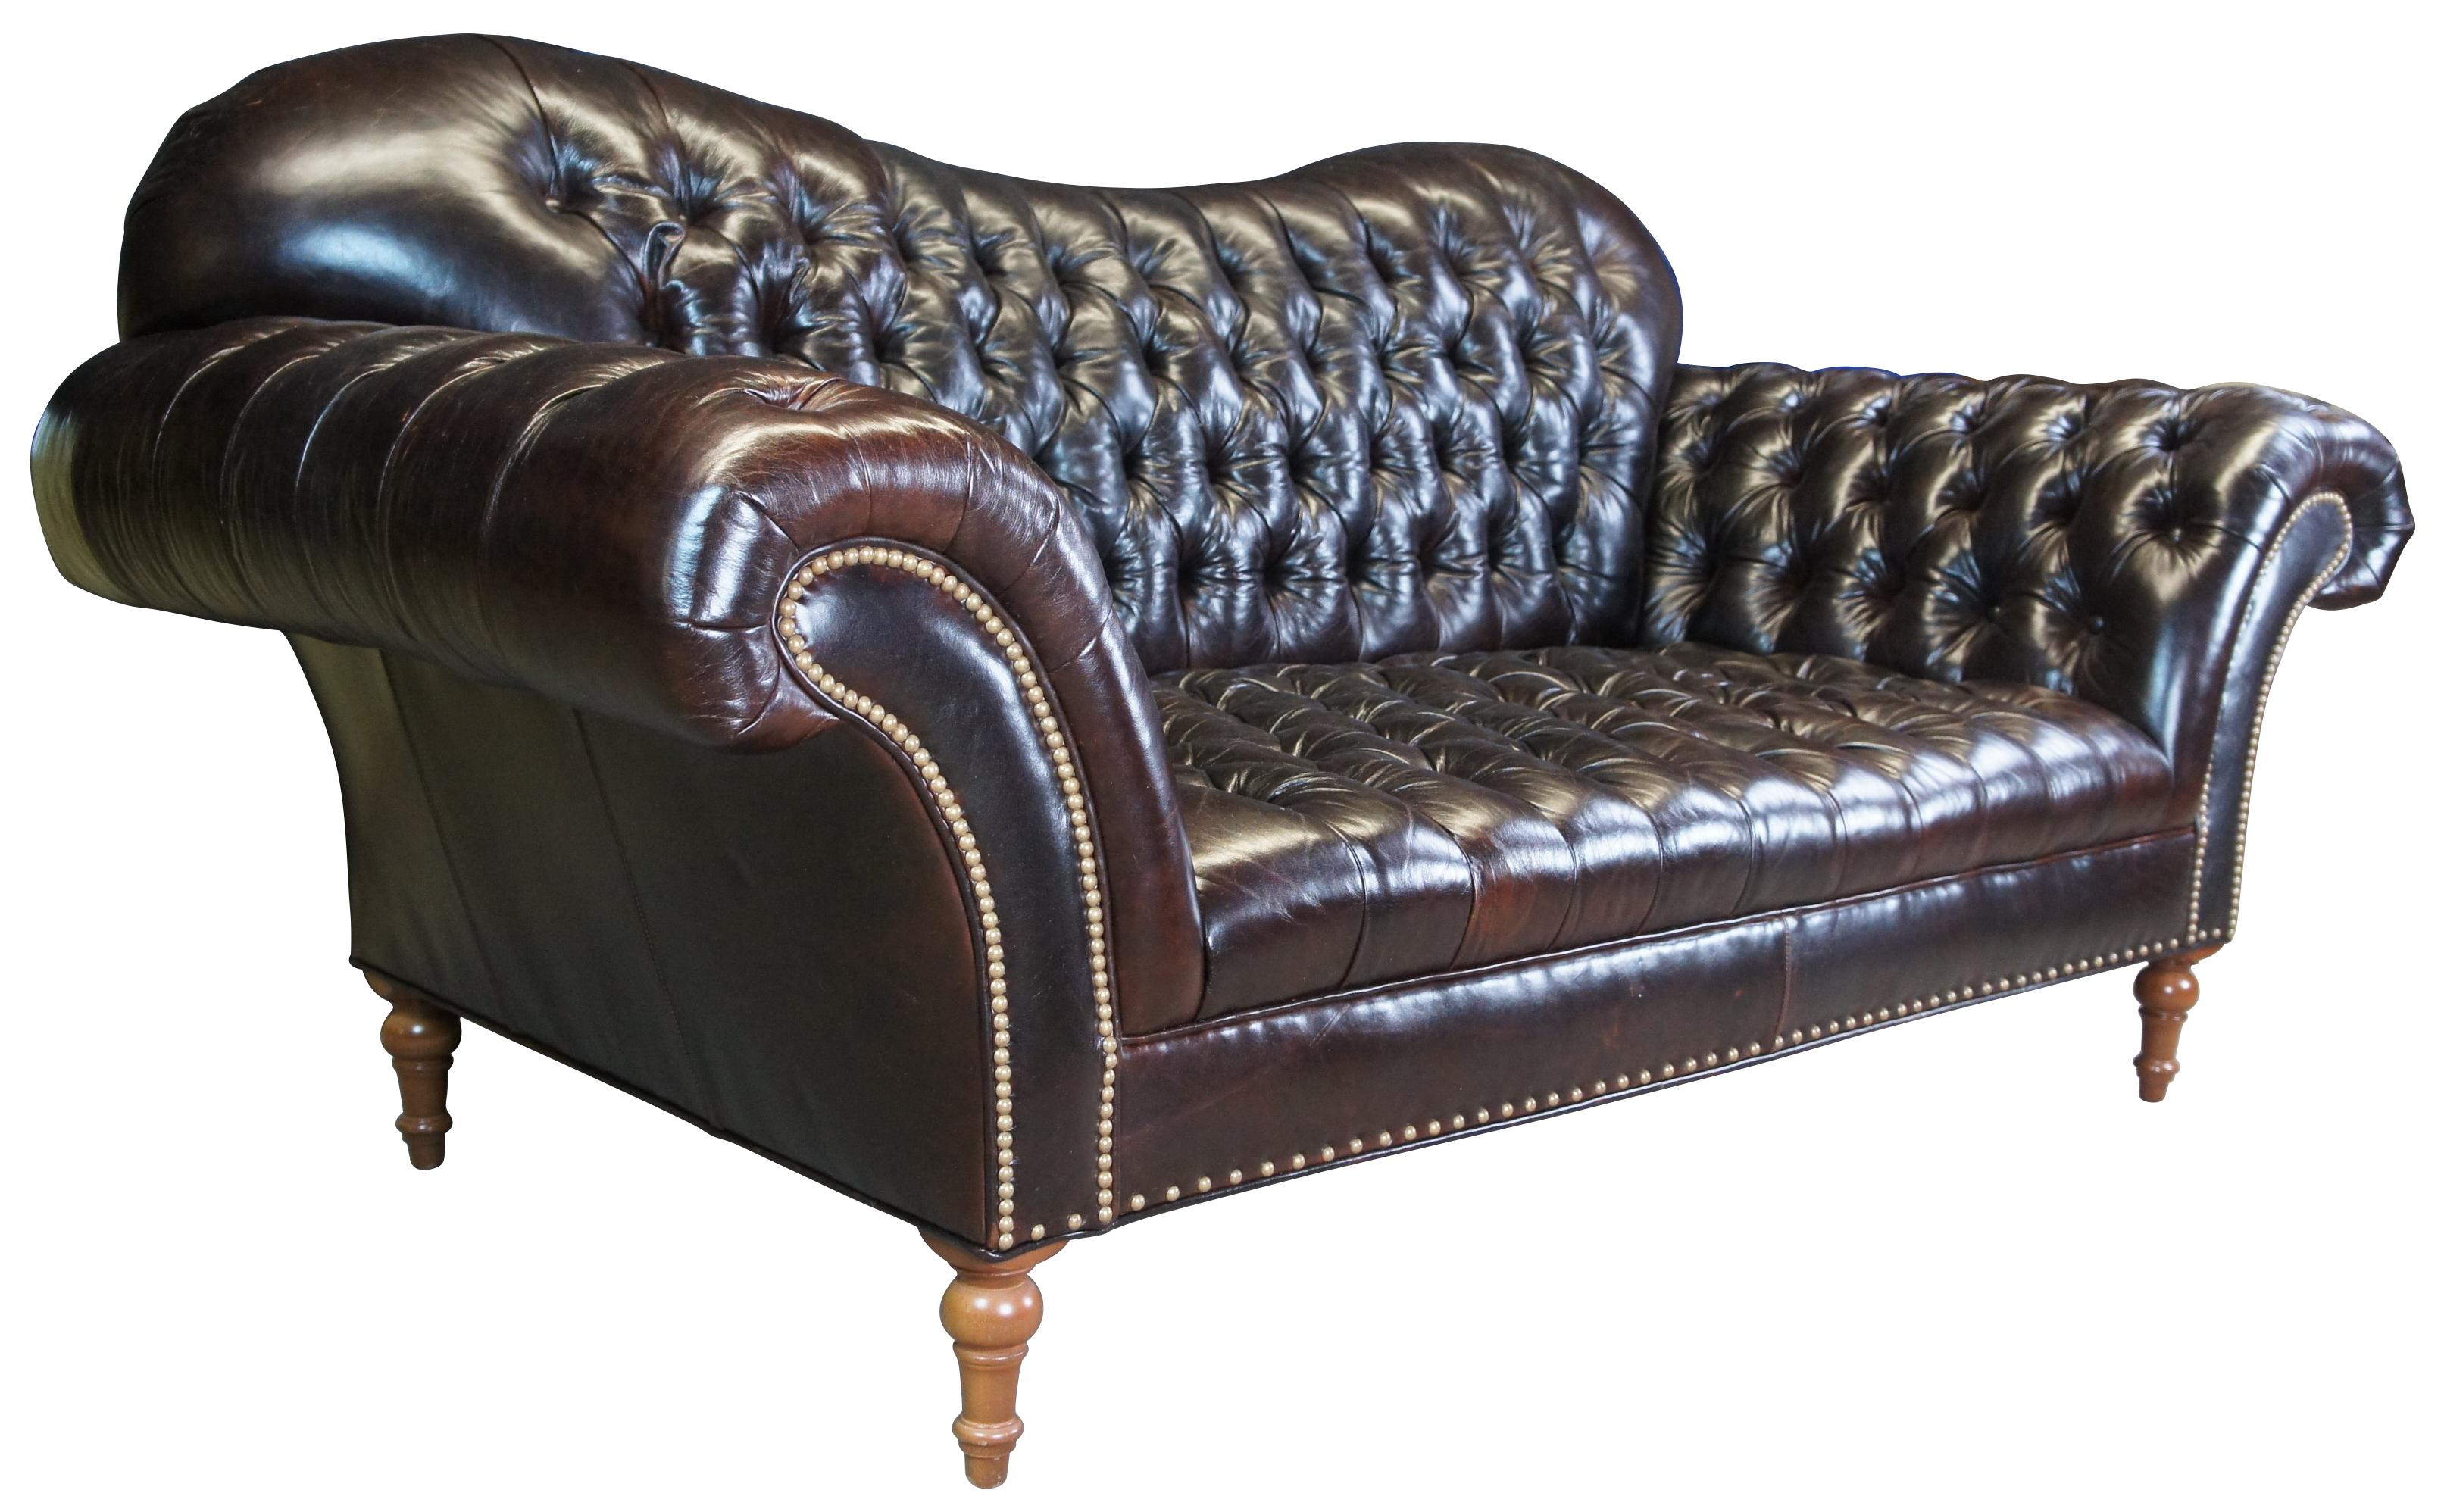 Vintage Arhaus Arabelle club fitted sofa, couch or love seat. Upholstered in a dark brown tufted leather featuring Chesterfield form with flared arms, a camelback and nailhead trim. The sofa is supported by maple turned feet.